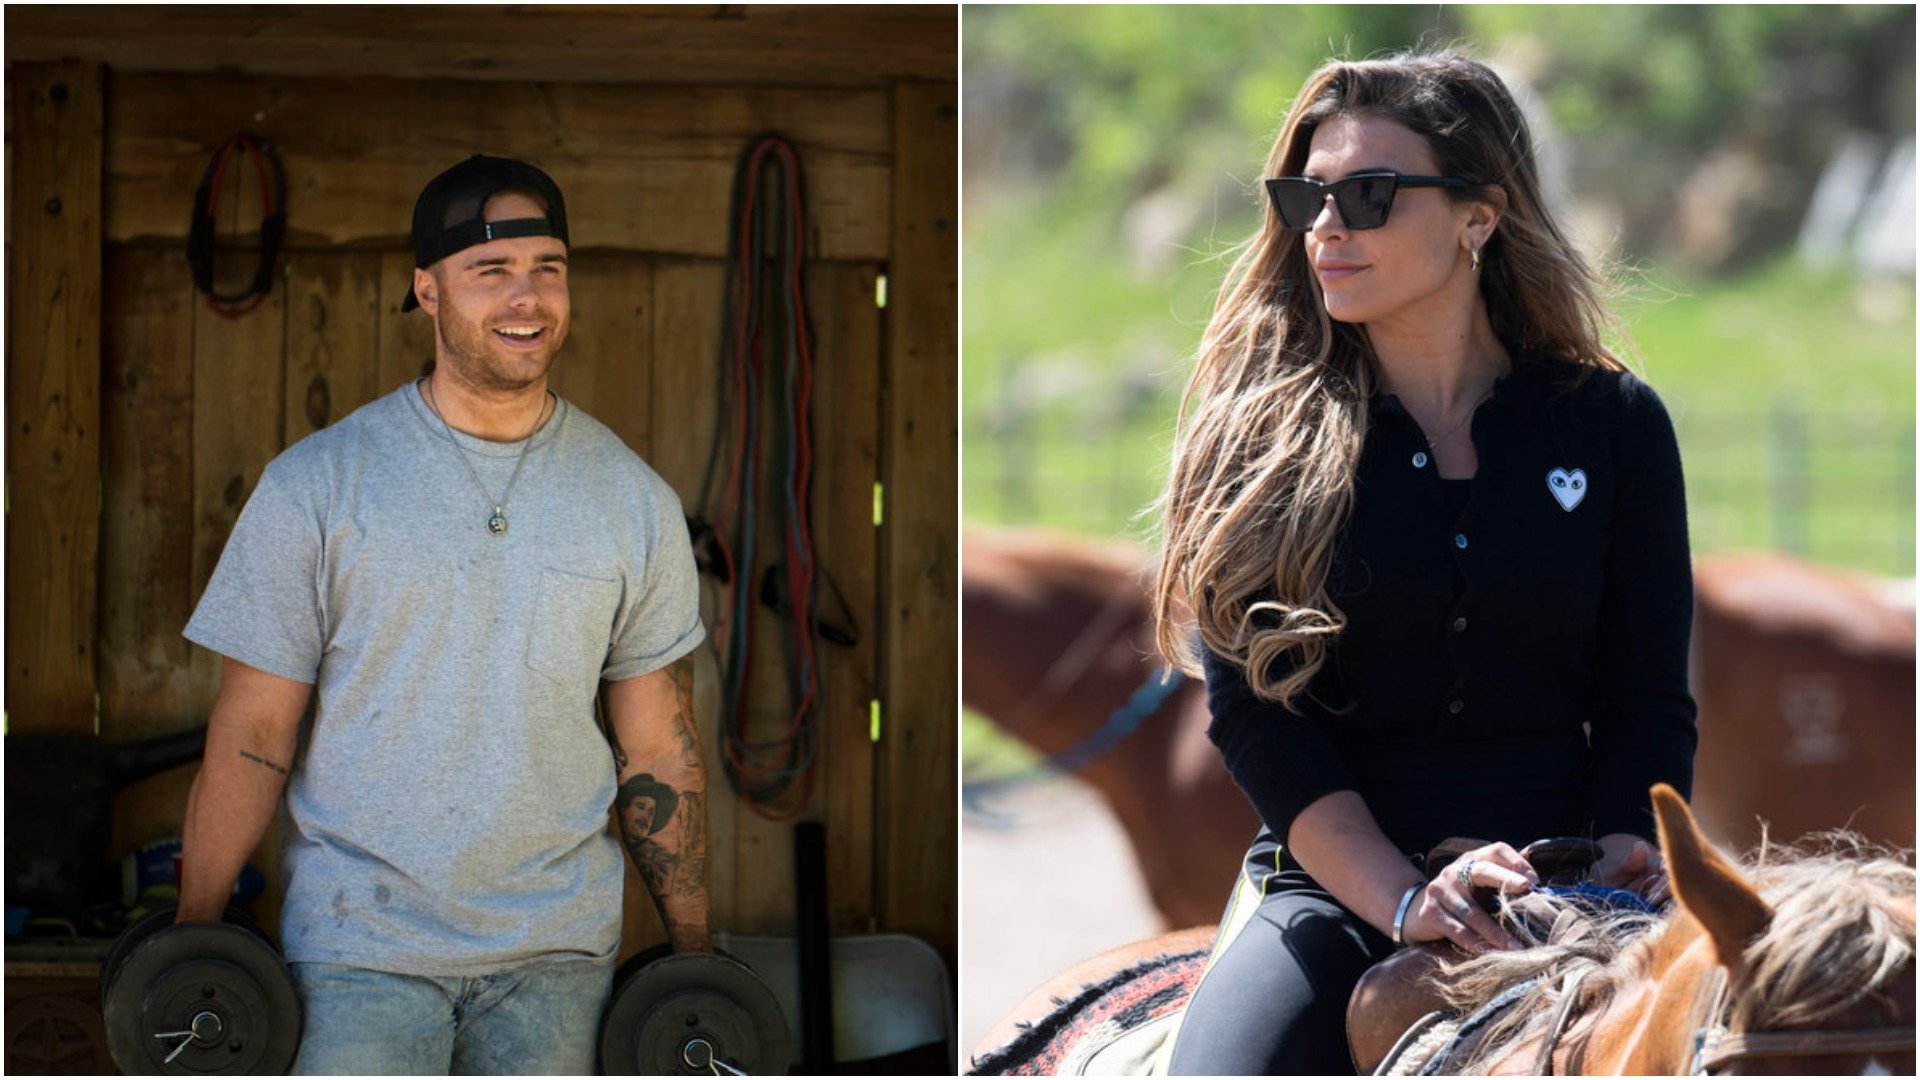 Austin Gunn carries weights and Hana Giraldo rides a horse on 'Relatively Famous: Ranch Rules'